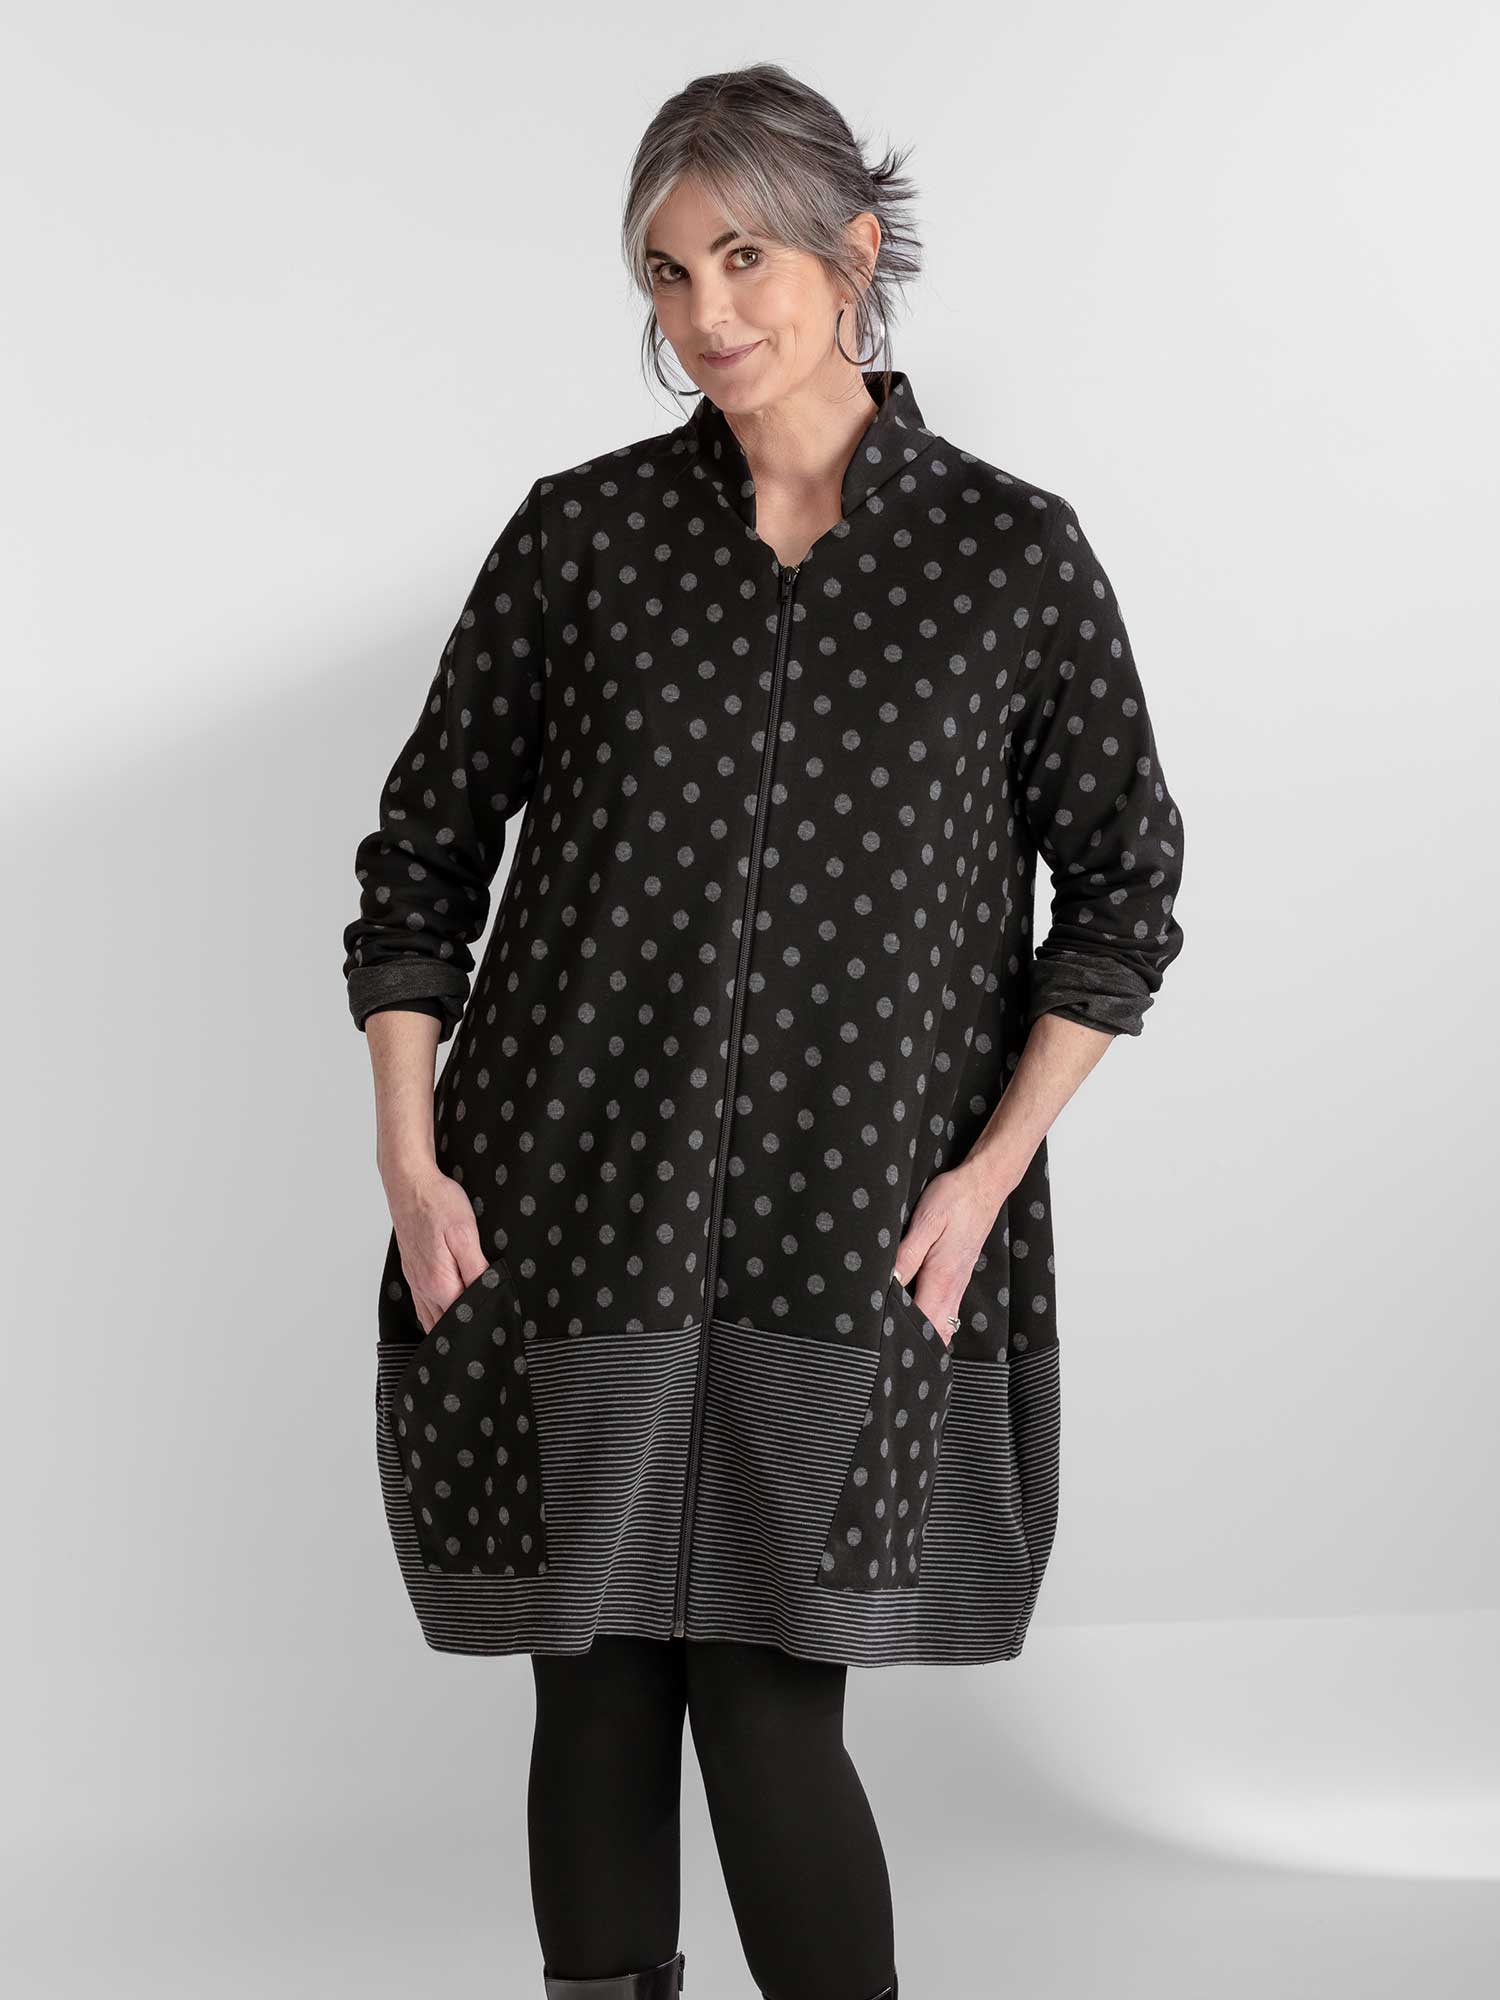 Spotted Dotted Dress/Tunic by F.H. Clothing